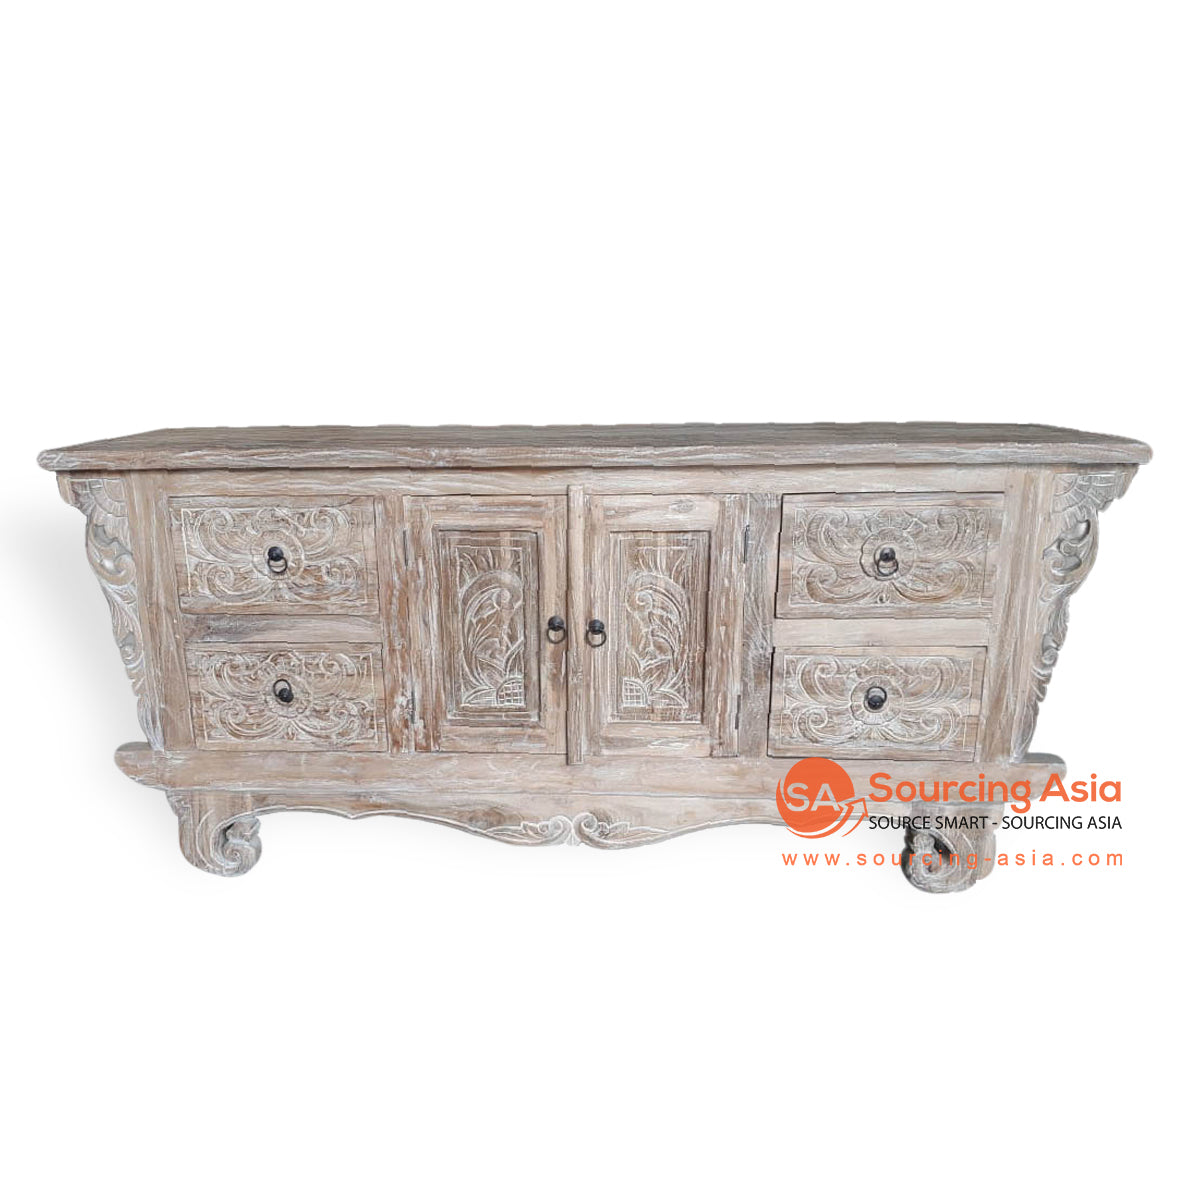 LAC057 LIGHT WHITE WASH RECYCLED TEAK WOOD TWO DOORS AND FOUR DRAWERS CARVED BUFFET